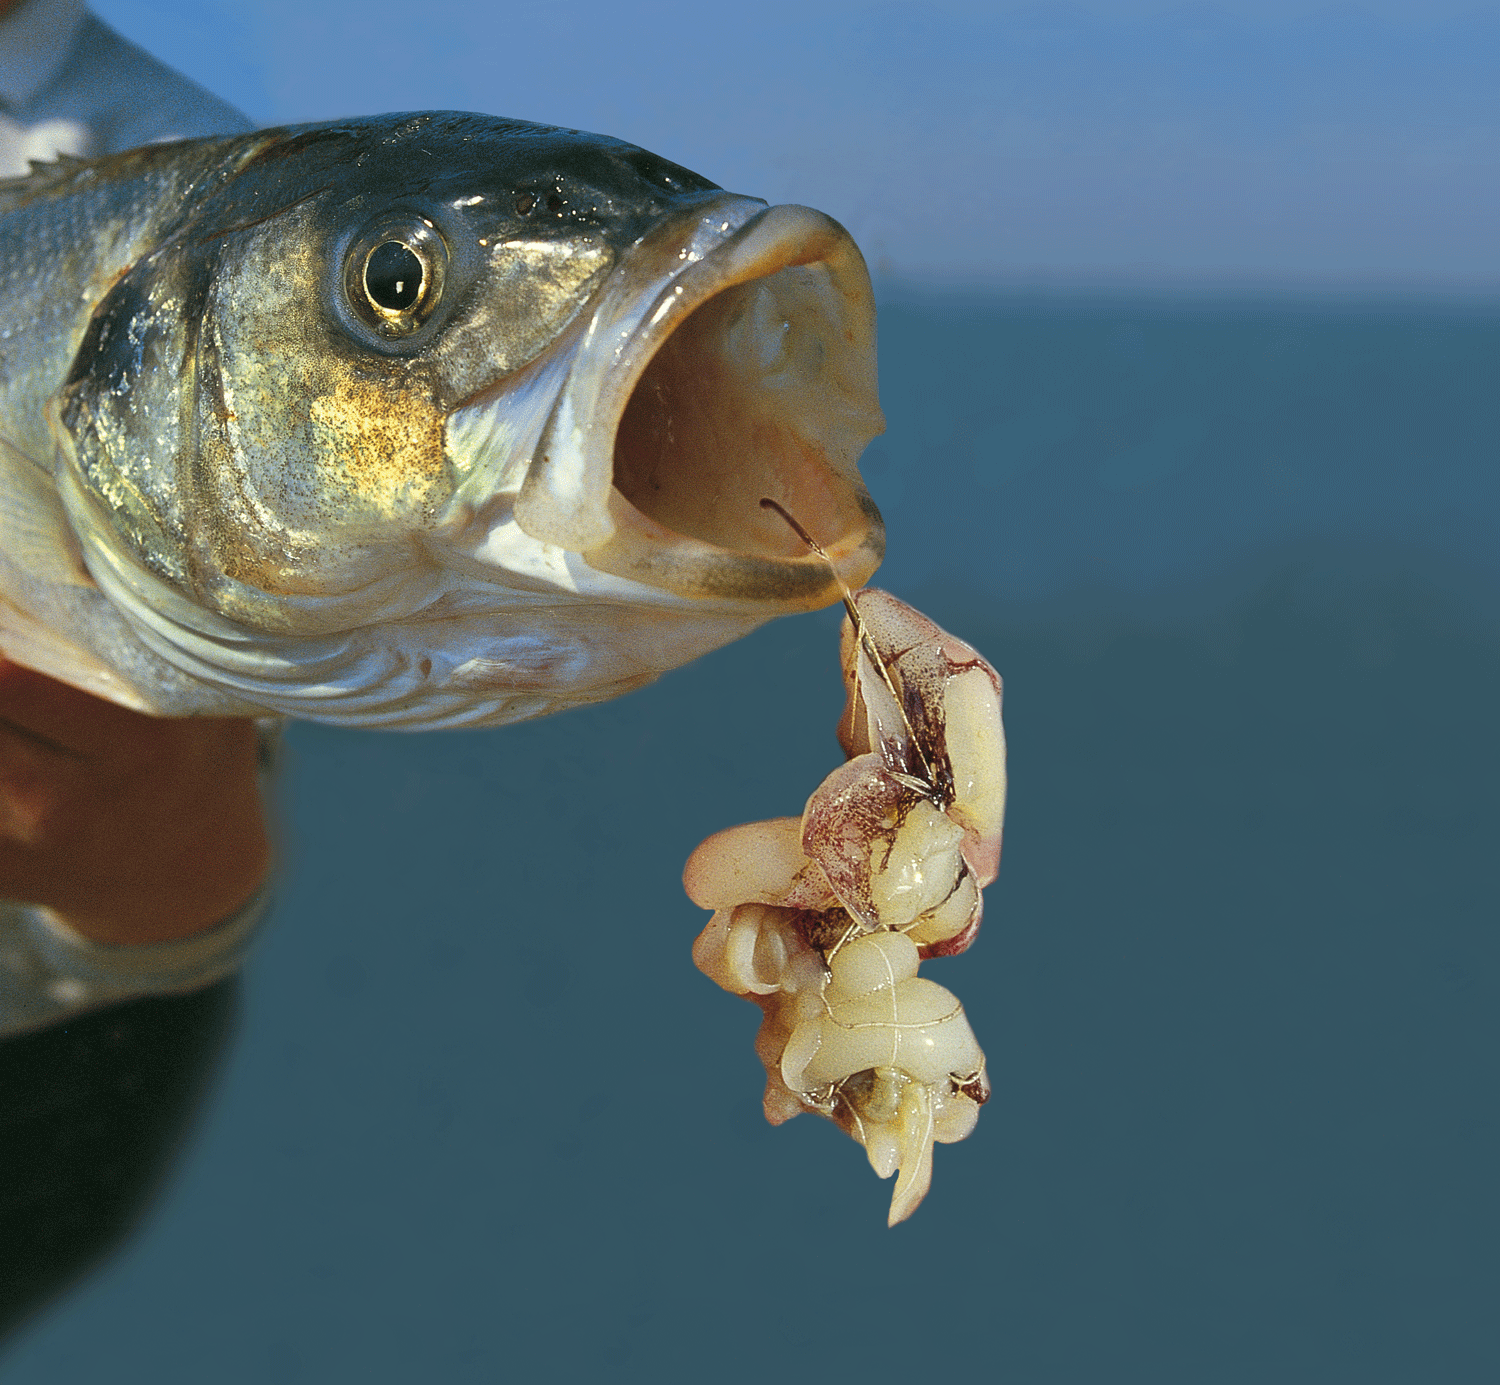 Tackle and Tactics to Catch Autumn Bass Using Squid as Bait